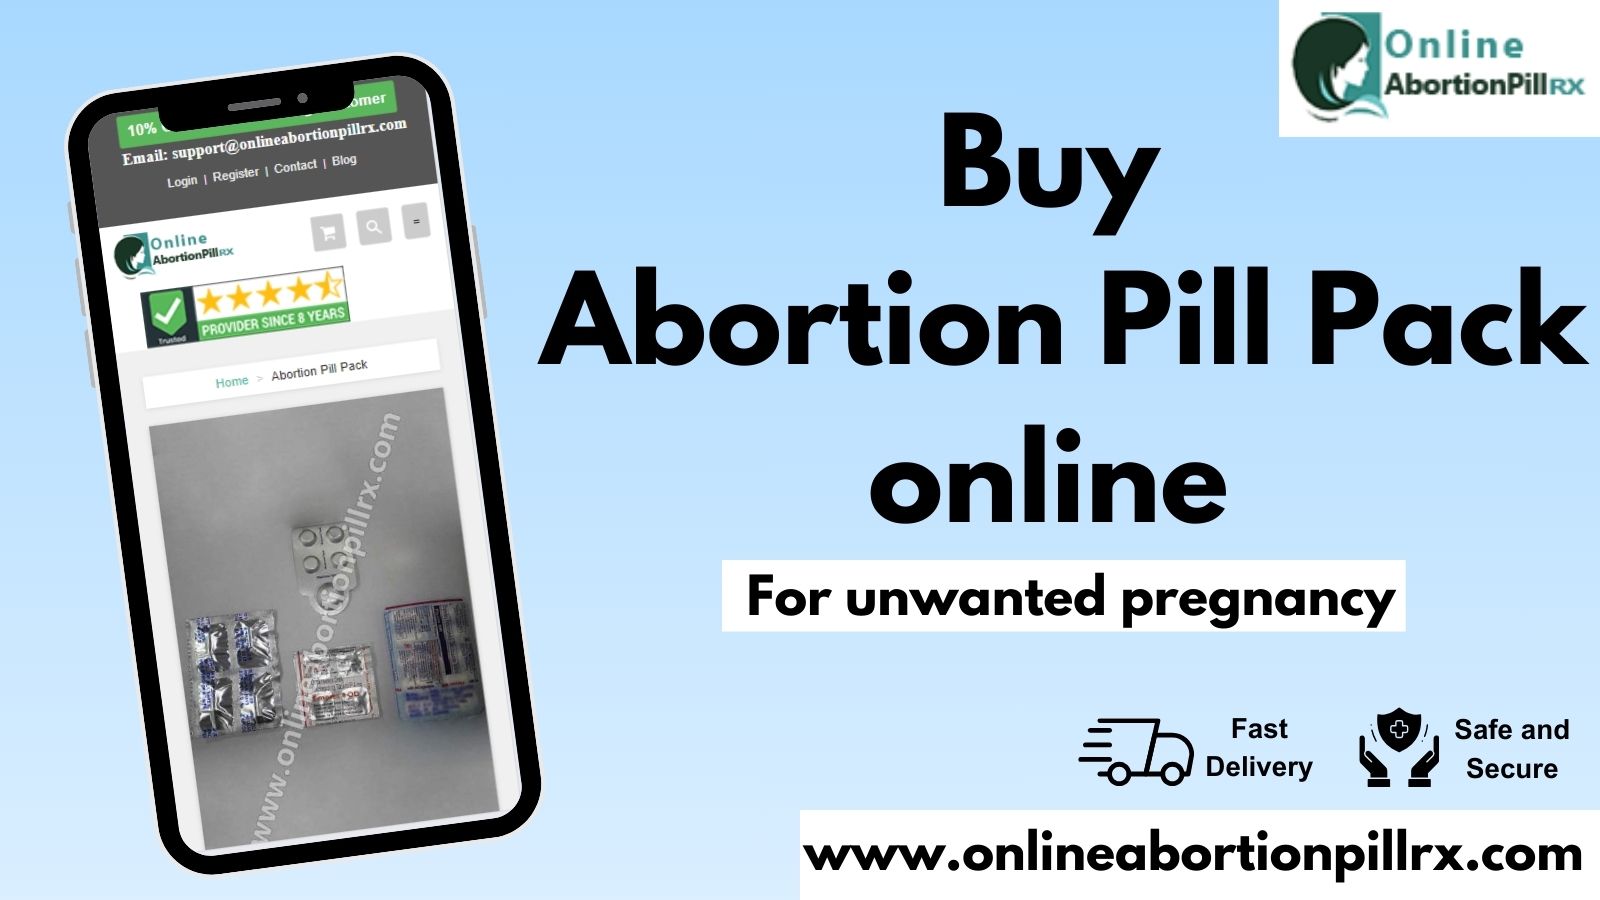 Where Can I Get The Abortion Pill Pack  - Texas - Dallas ID1538614